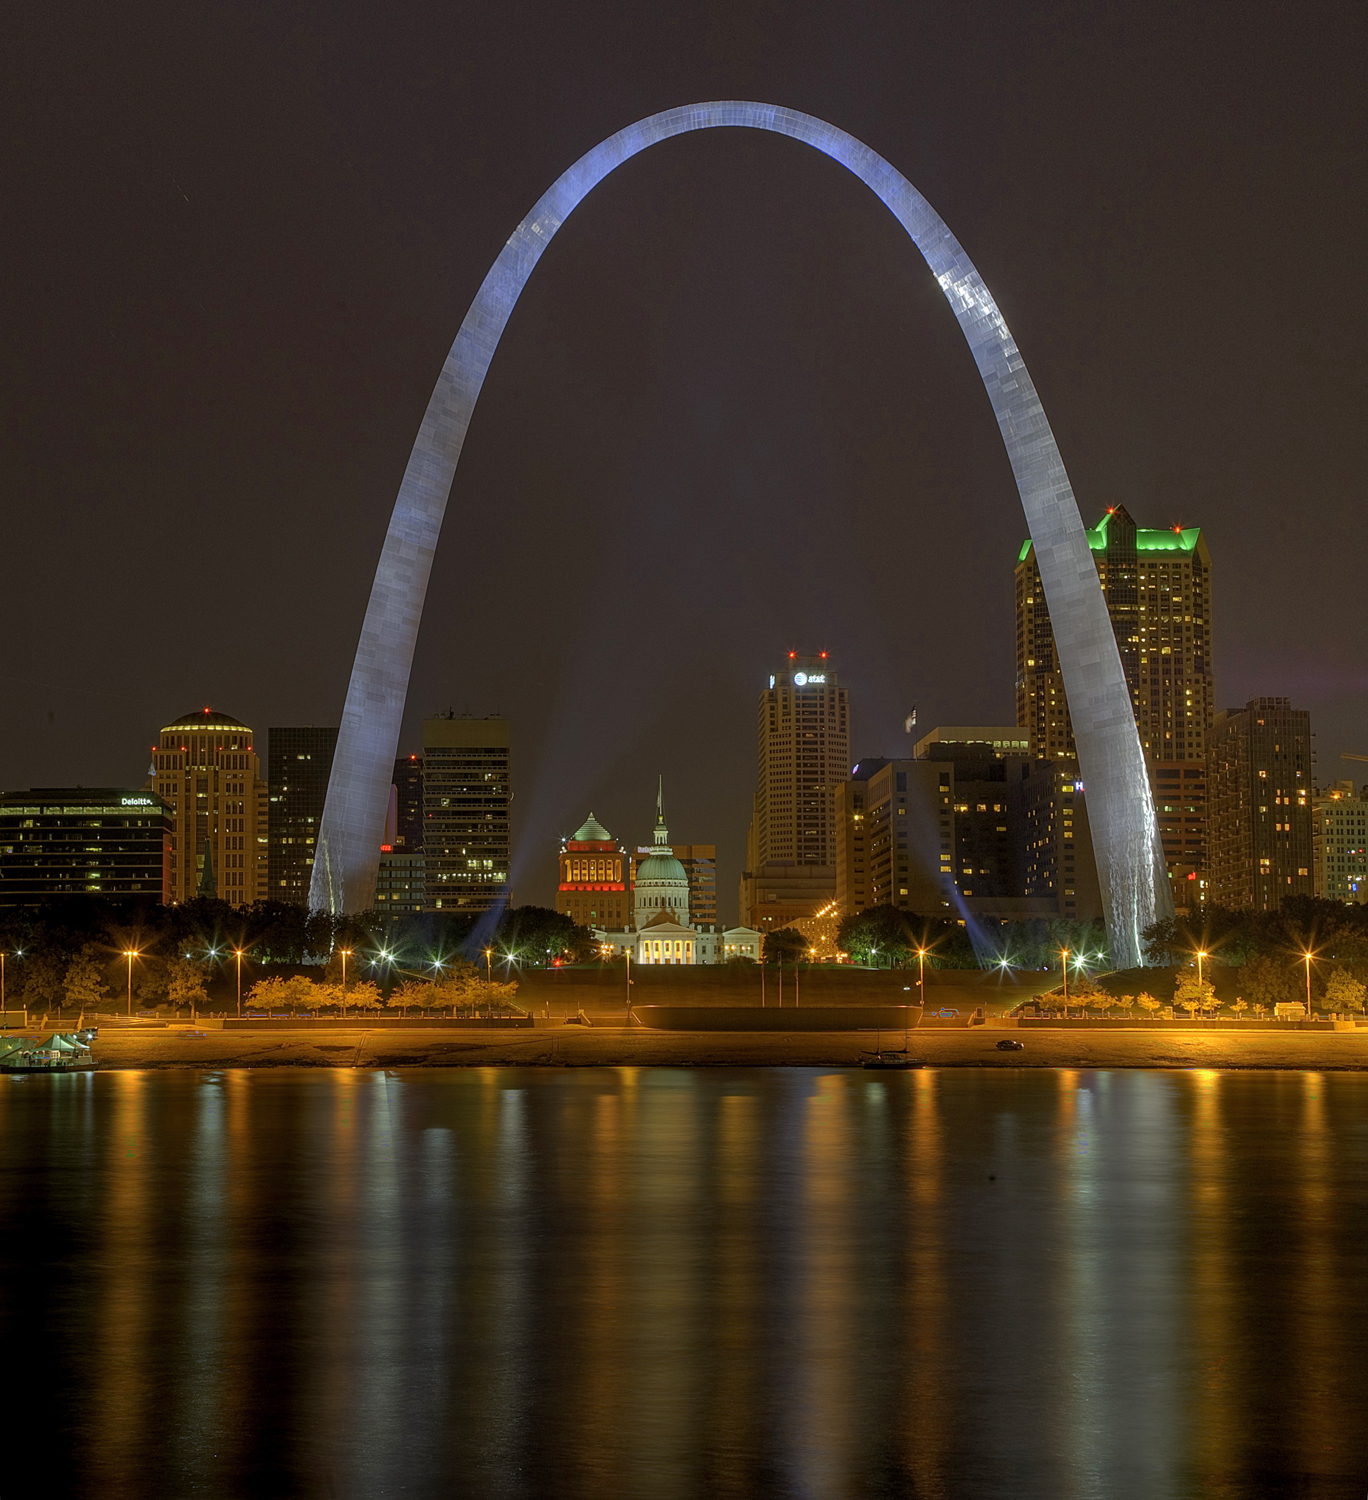 Meet me in St. Louis -- for a most sinful time! - www.semadata.org